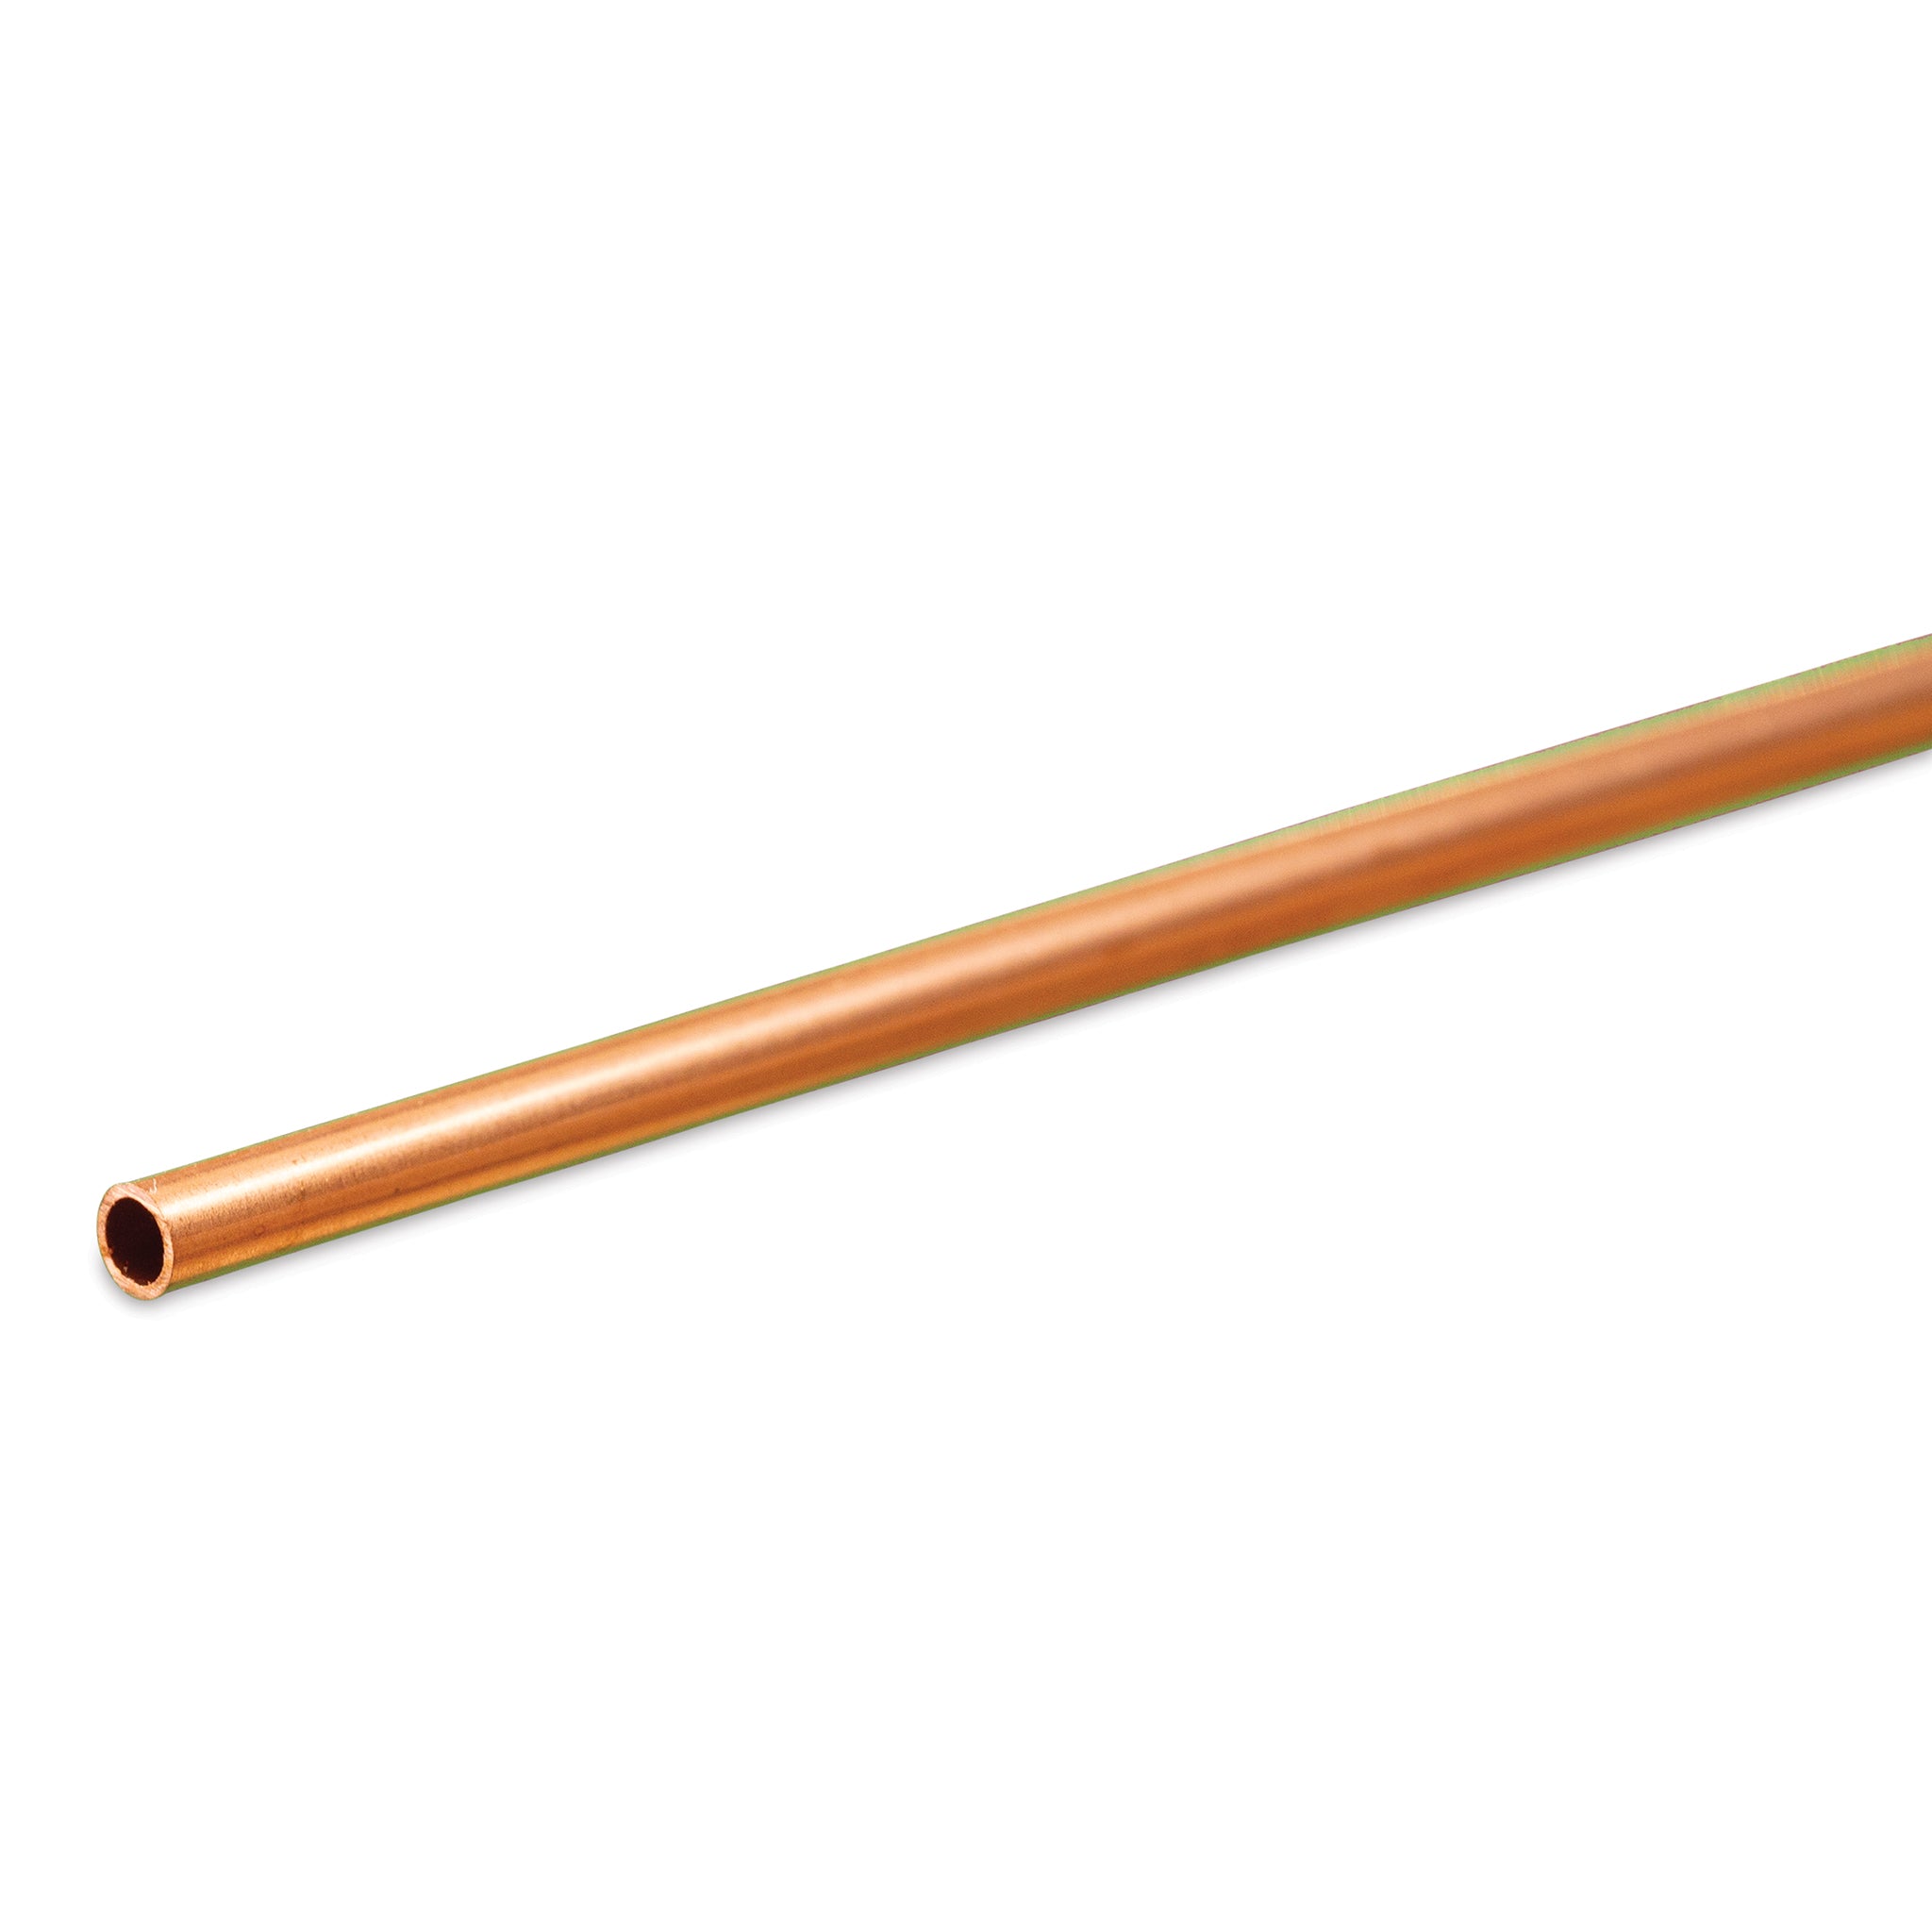 K&S Metals 8120 Round Copper Tube 1/8" OD x 0.014" Wall x 12" Long (1 Piece)